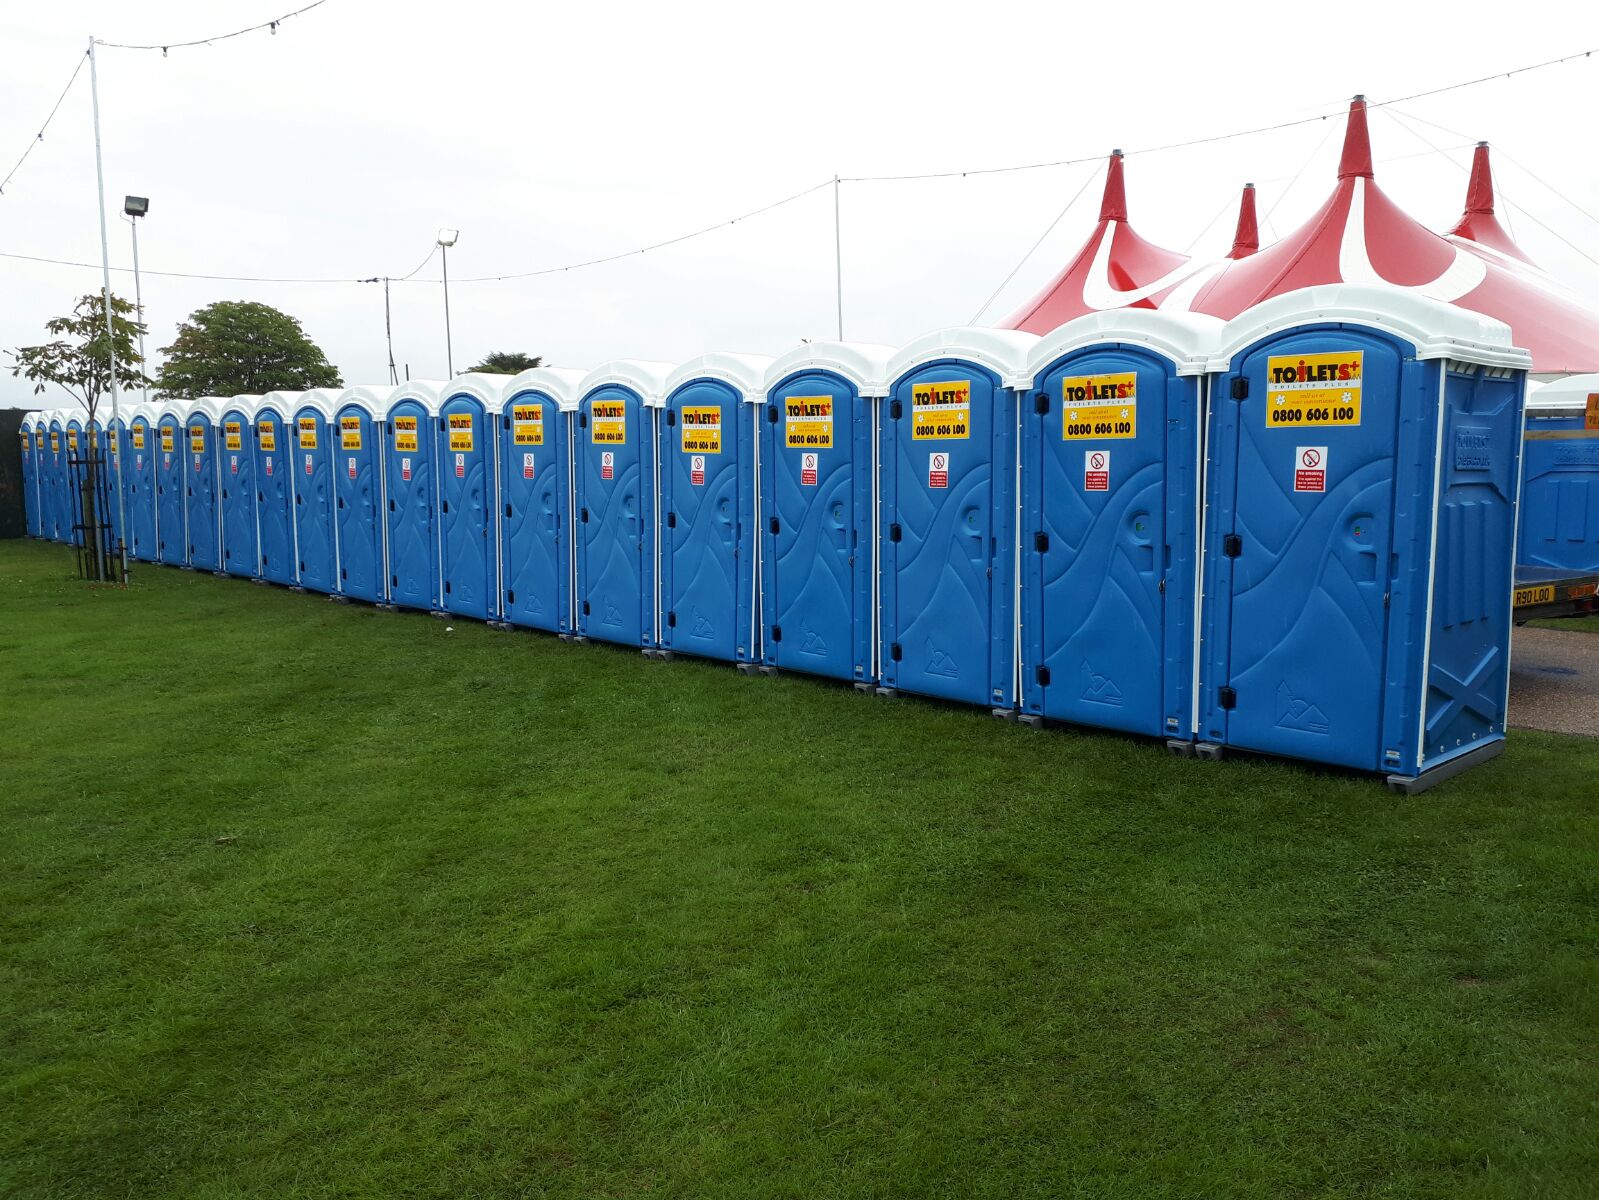 Standard toilets lined up at event